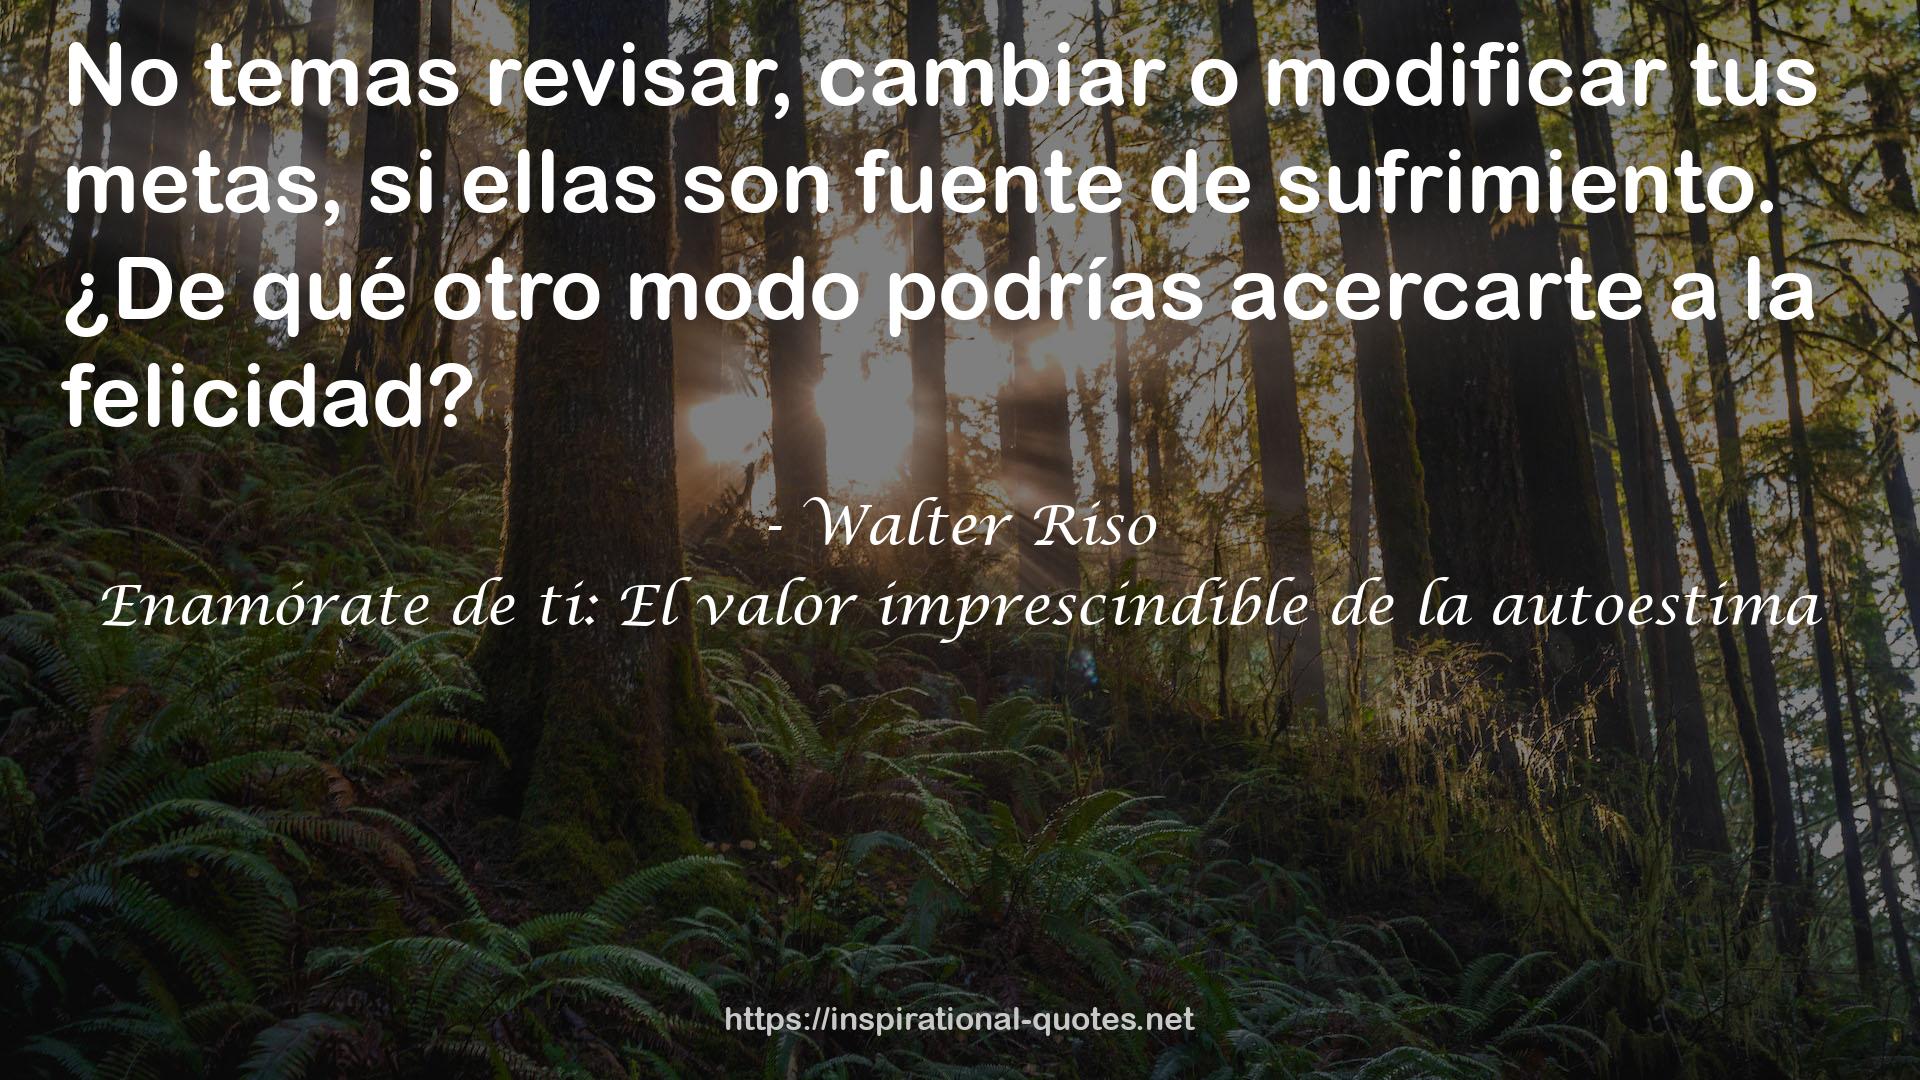 Walter Riso QUOTES